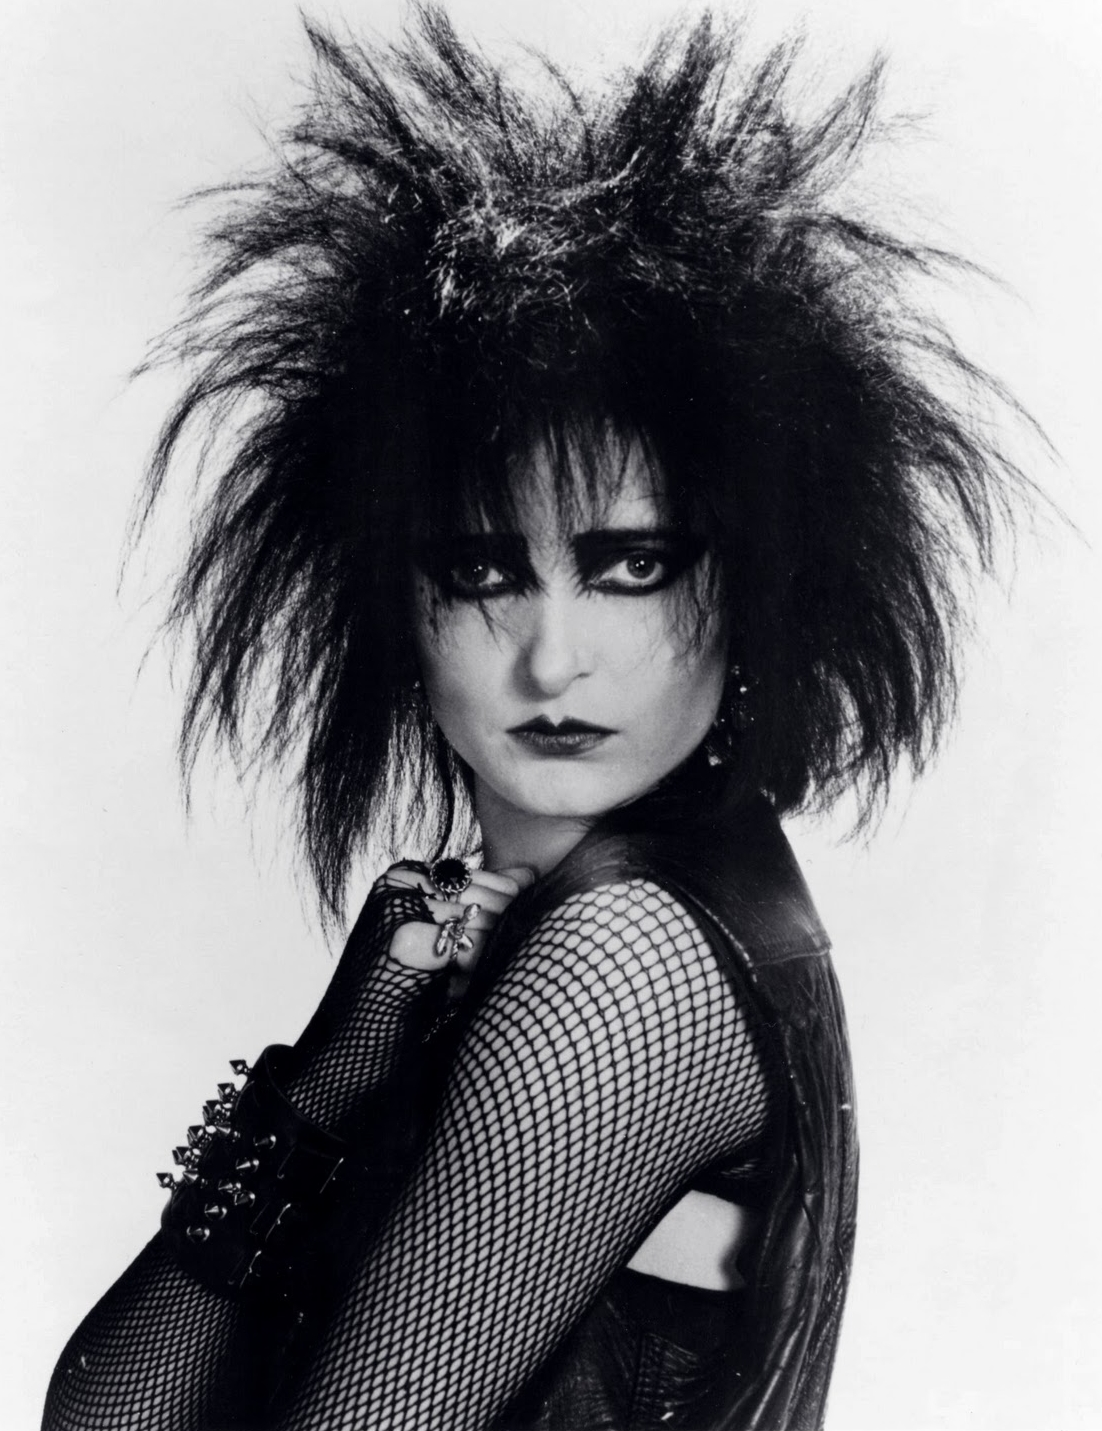 Siouxsie and the banshees midi files